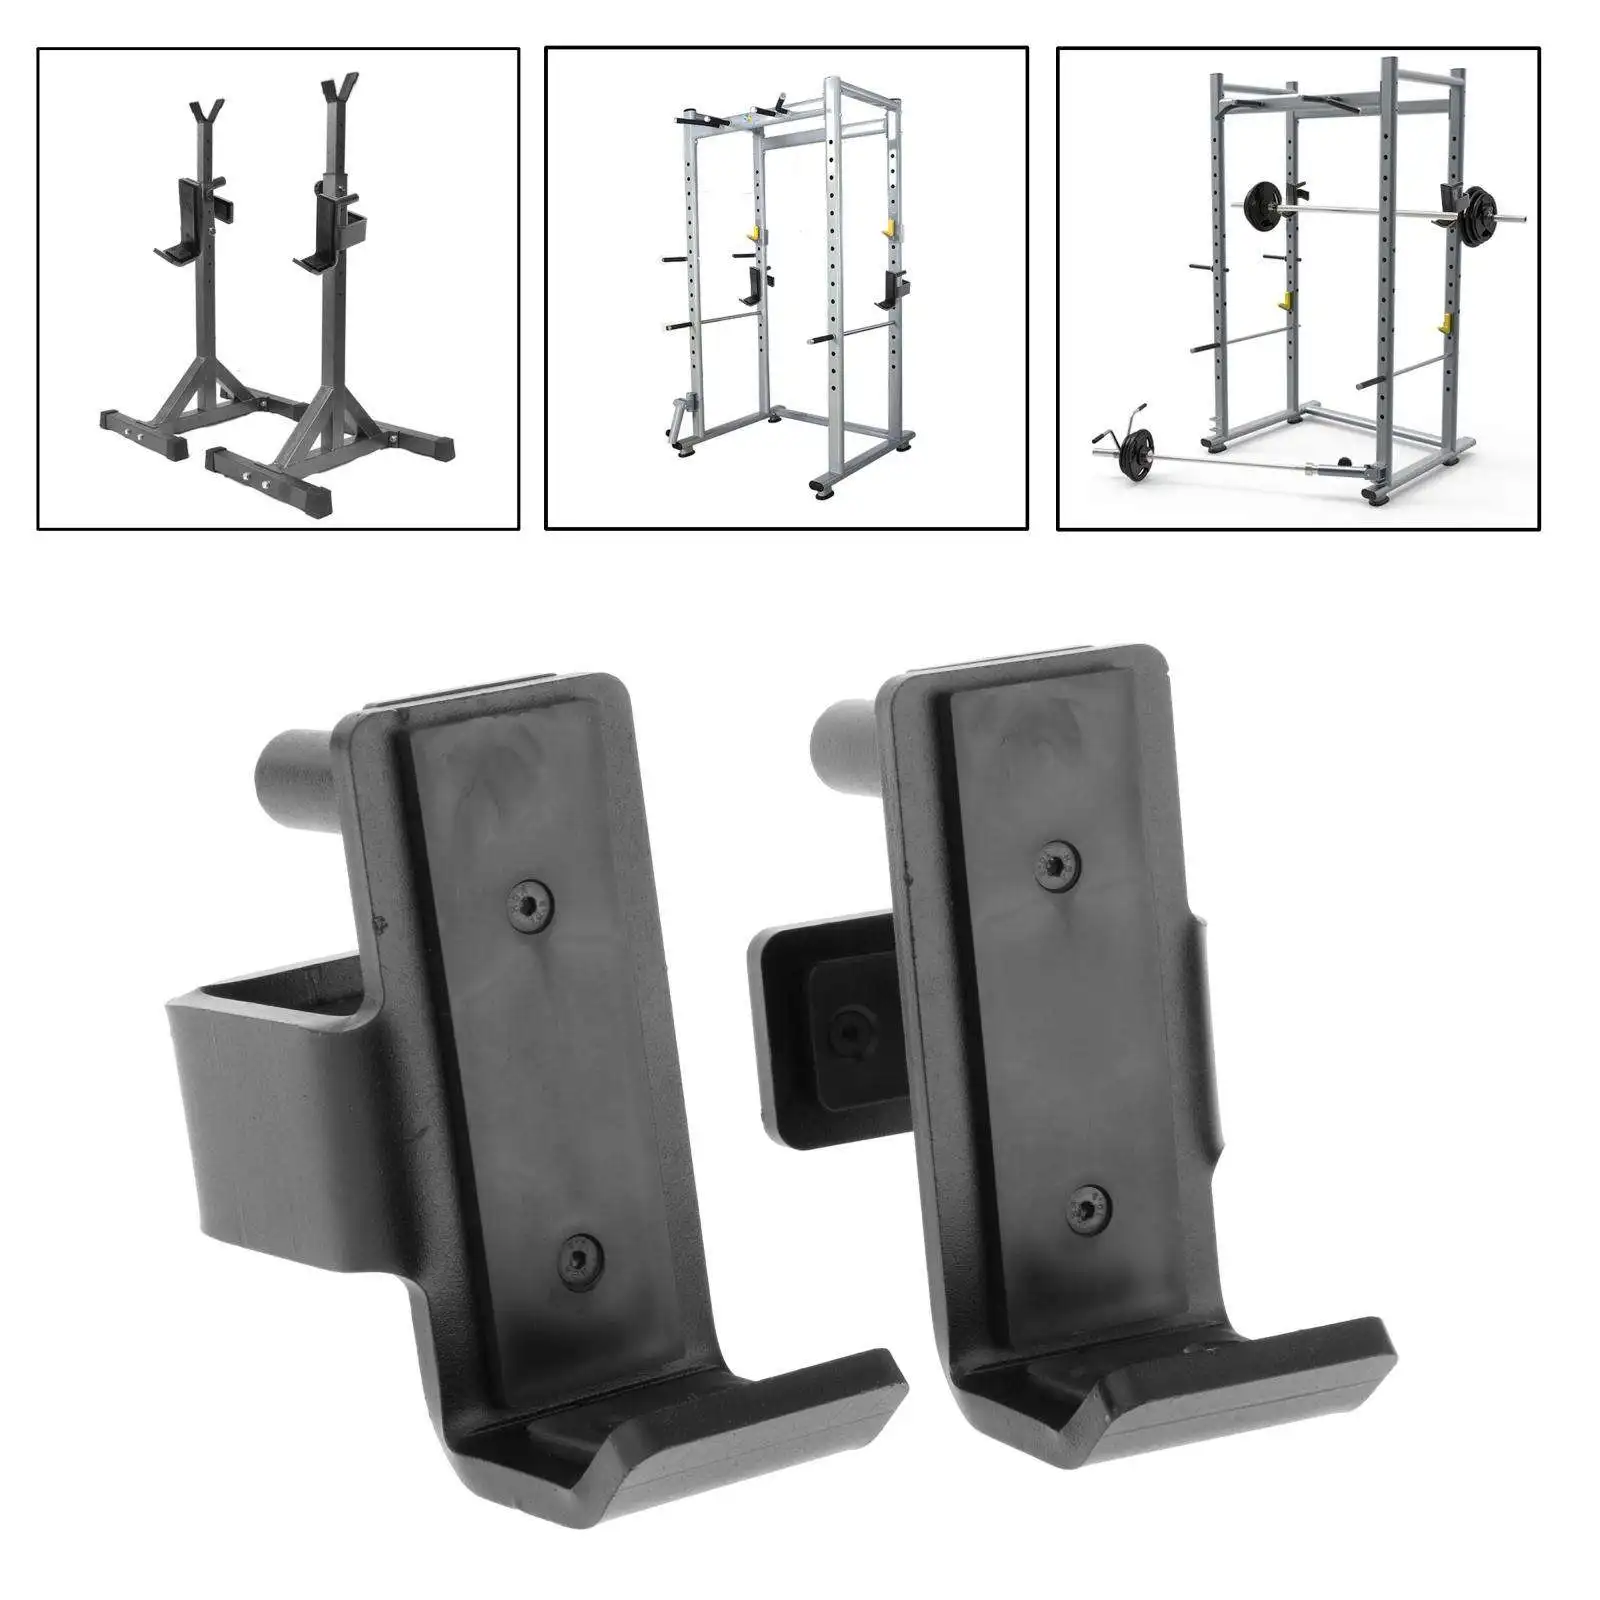 ZOVOTA J-Hooks Barbell Holder for Power Rack J-Cup Weight Rack Fit 3x3 inch Power Cages Square Tube 